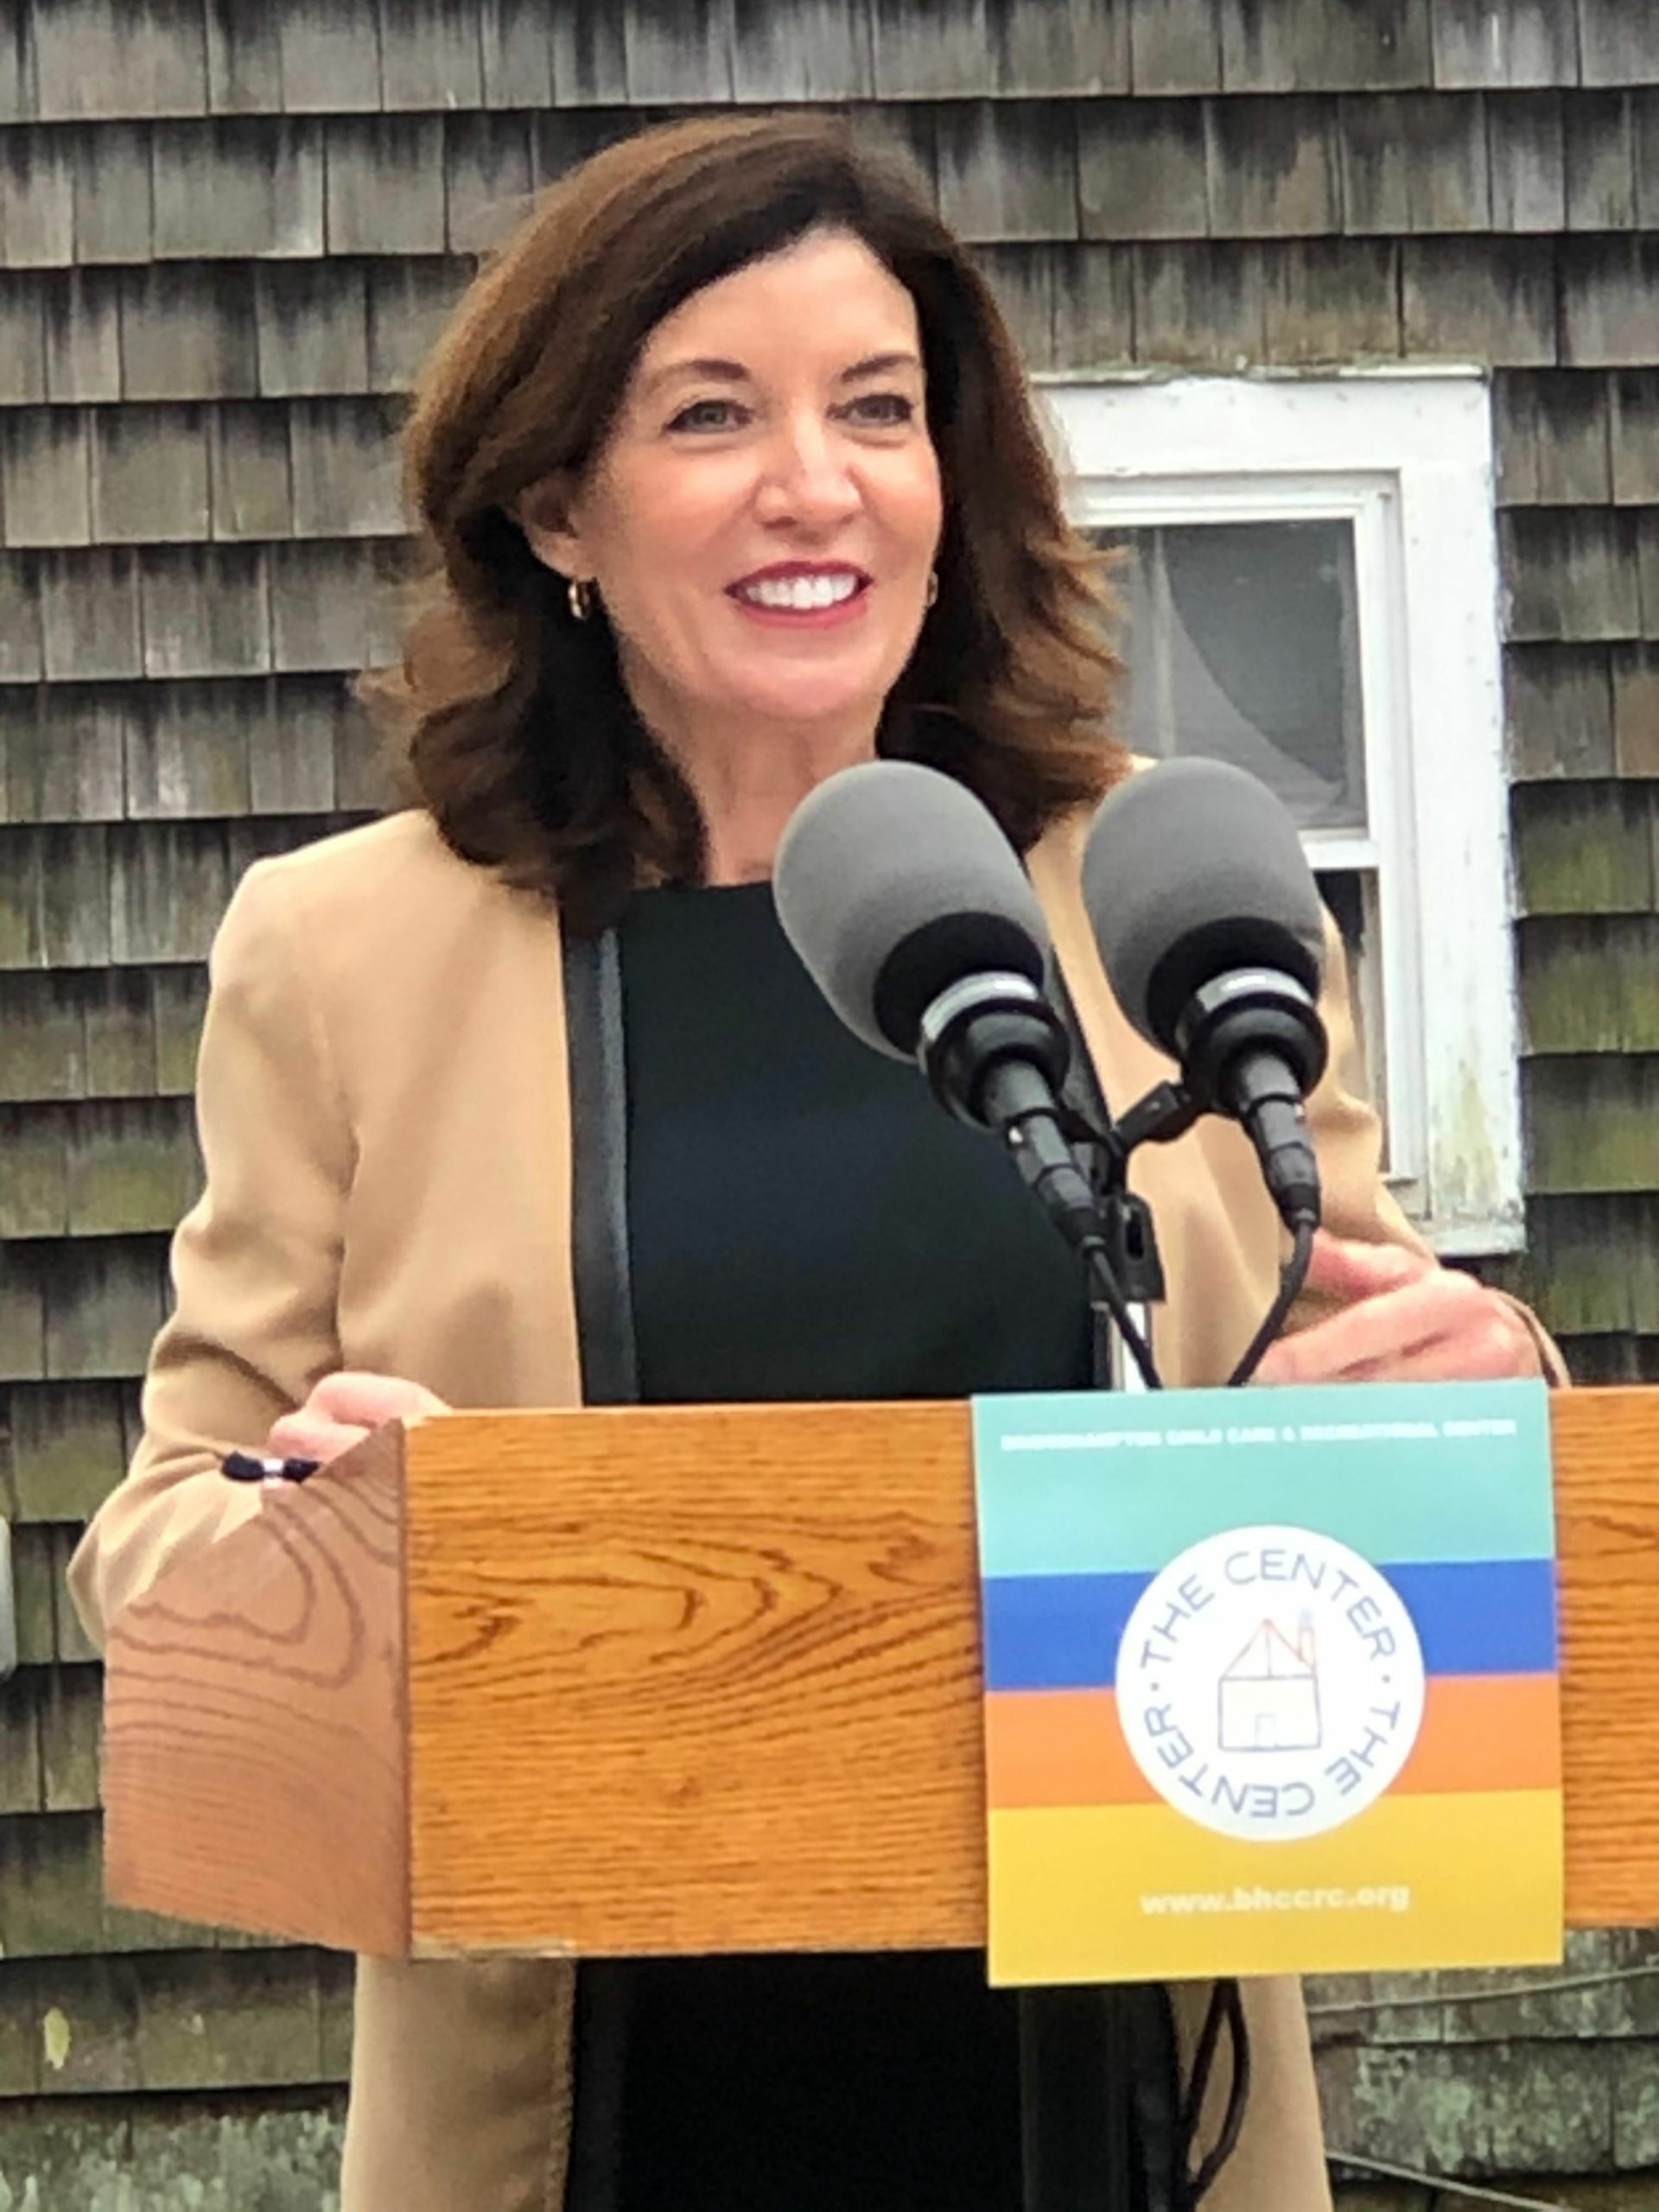 Lt. Governor Kathy Hochul at the Center's groundbreaking.